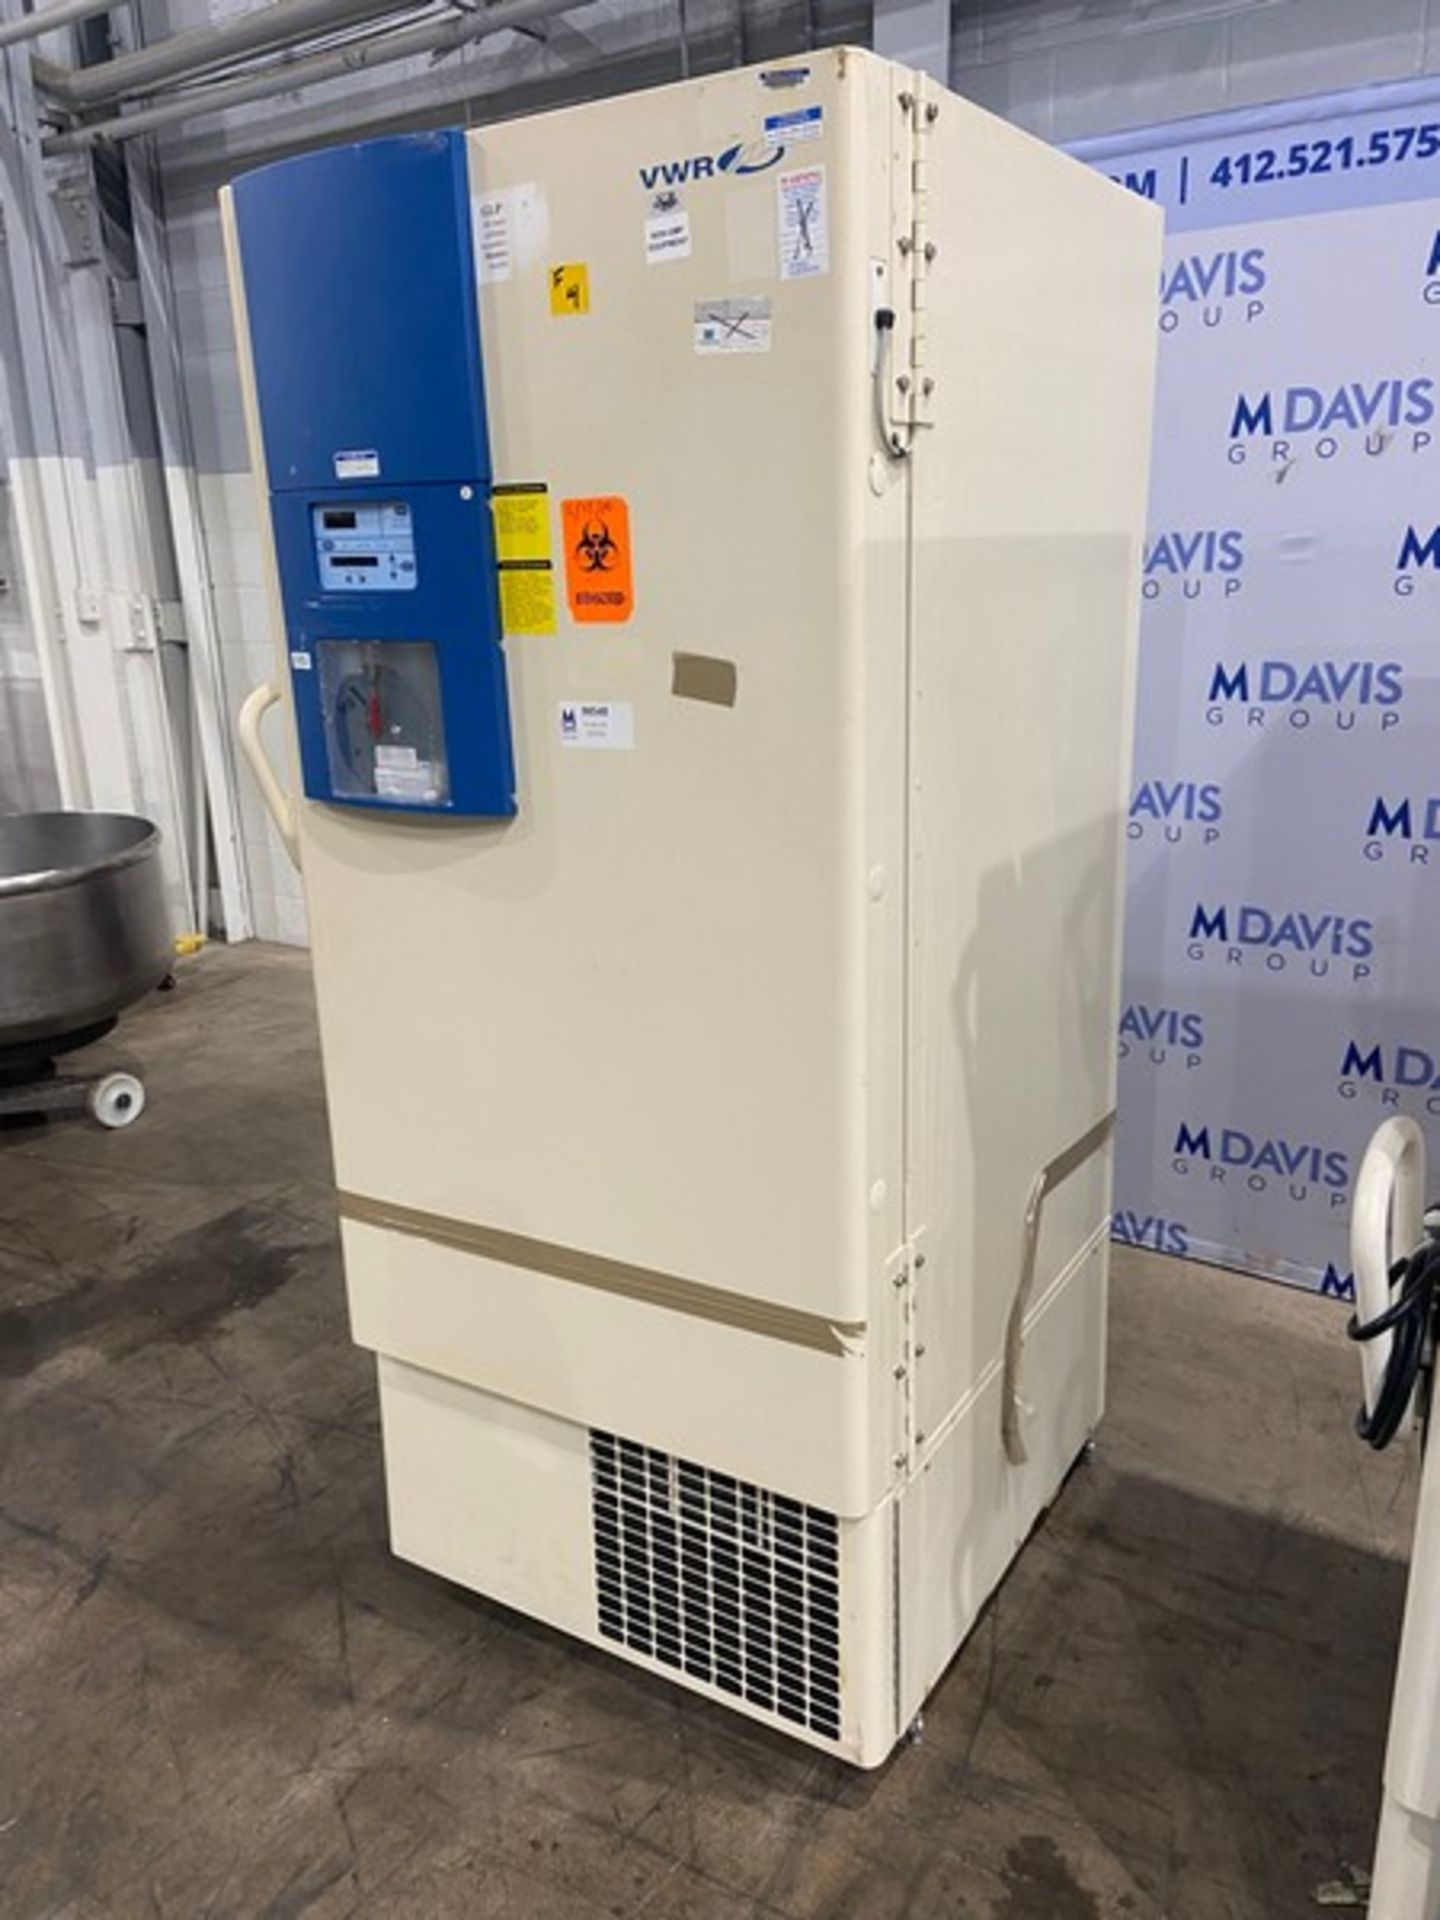 VWR Laboratory Freezer, M/N 5604, S/N 814155, 230 Volts, 1 Phase, Mounted on Wheels (INV#103513) ( - Image 2 of 5